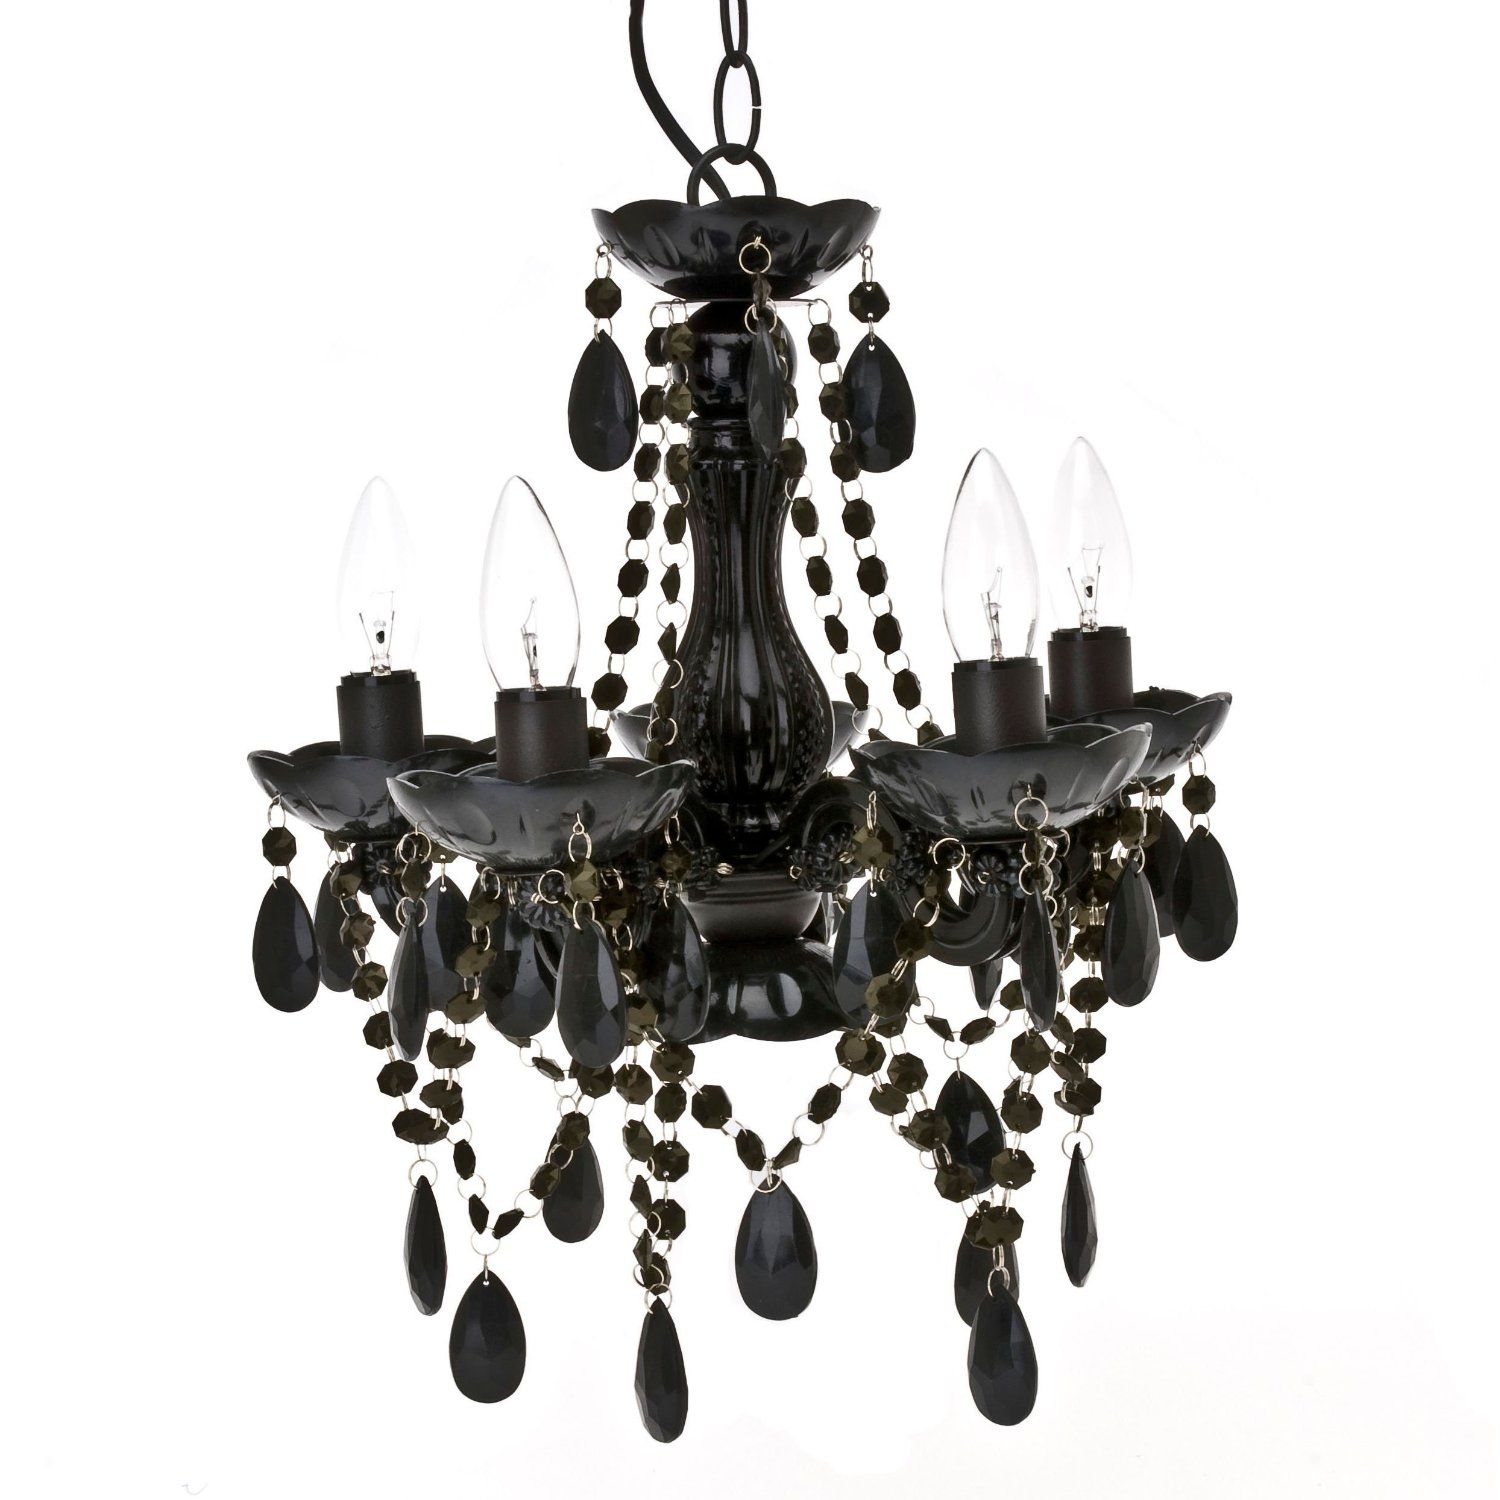 Modern Black Chandelier The Unique Looks Of Black Chandelier Inside Modern Black Chandelier (Photo 4 of 12)